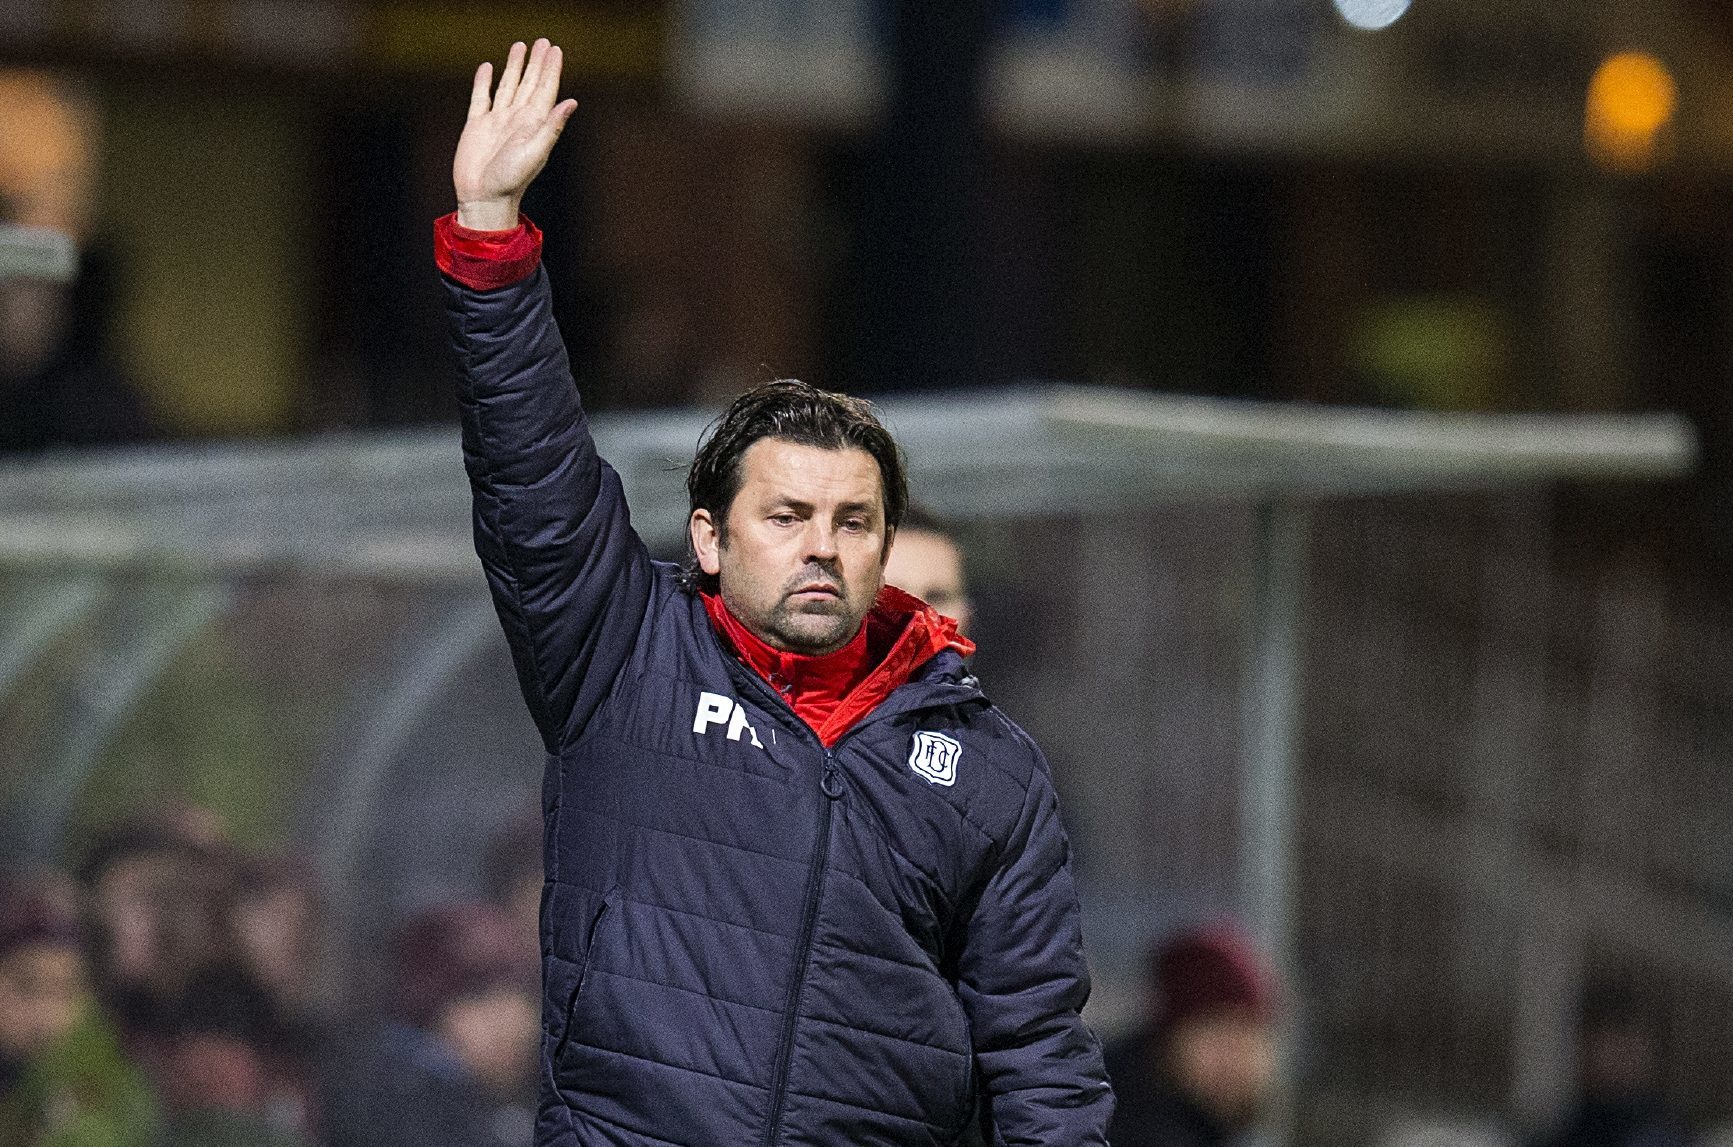 Paul Hartley guides his team to victory.